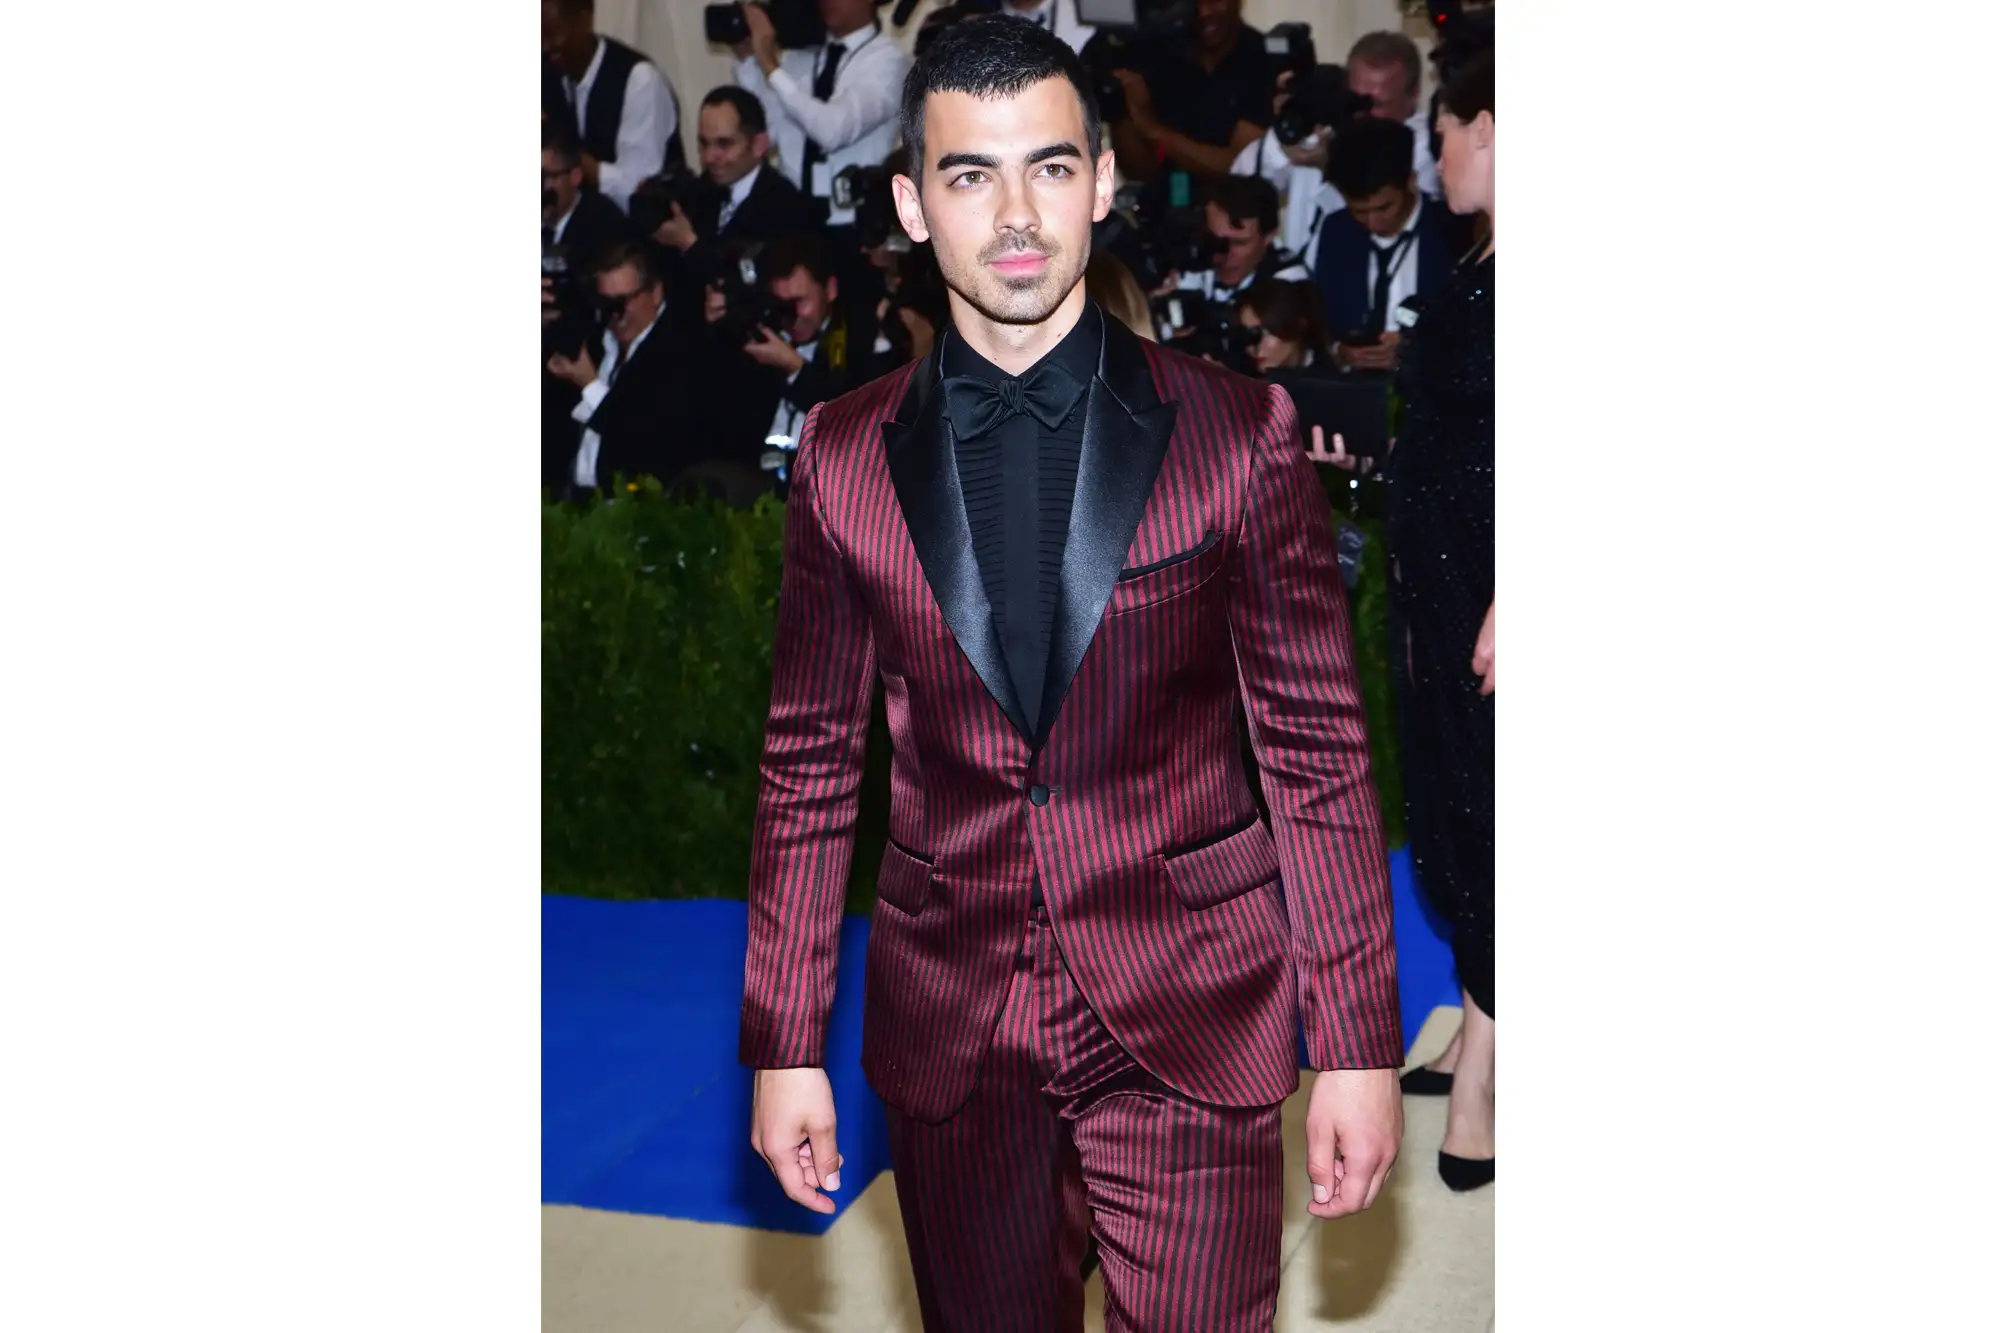 NEW YORK, NY - MAY 01: Joe Jonas arrives at &quot;Rei Kawakubo/Comme des Garcons: Art Of The In-Between&quot; Costume Institute Gala at The Metropolitan Museum on May 1, 2017 in New York City. (Photo by Sean Zanni/Patrick McMullan via Getty Images)